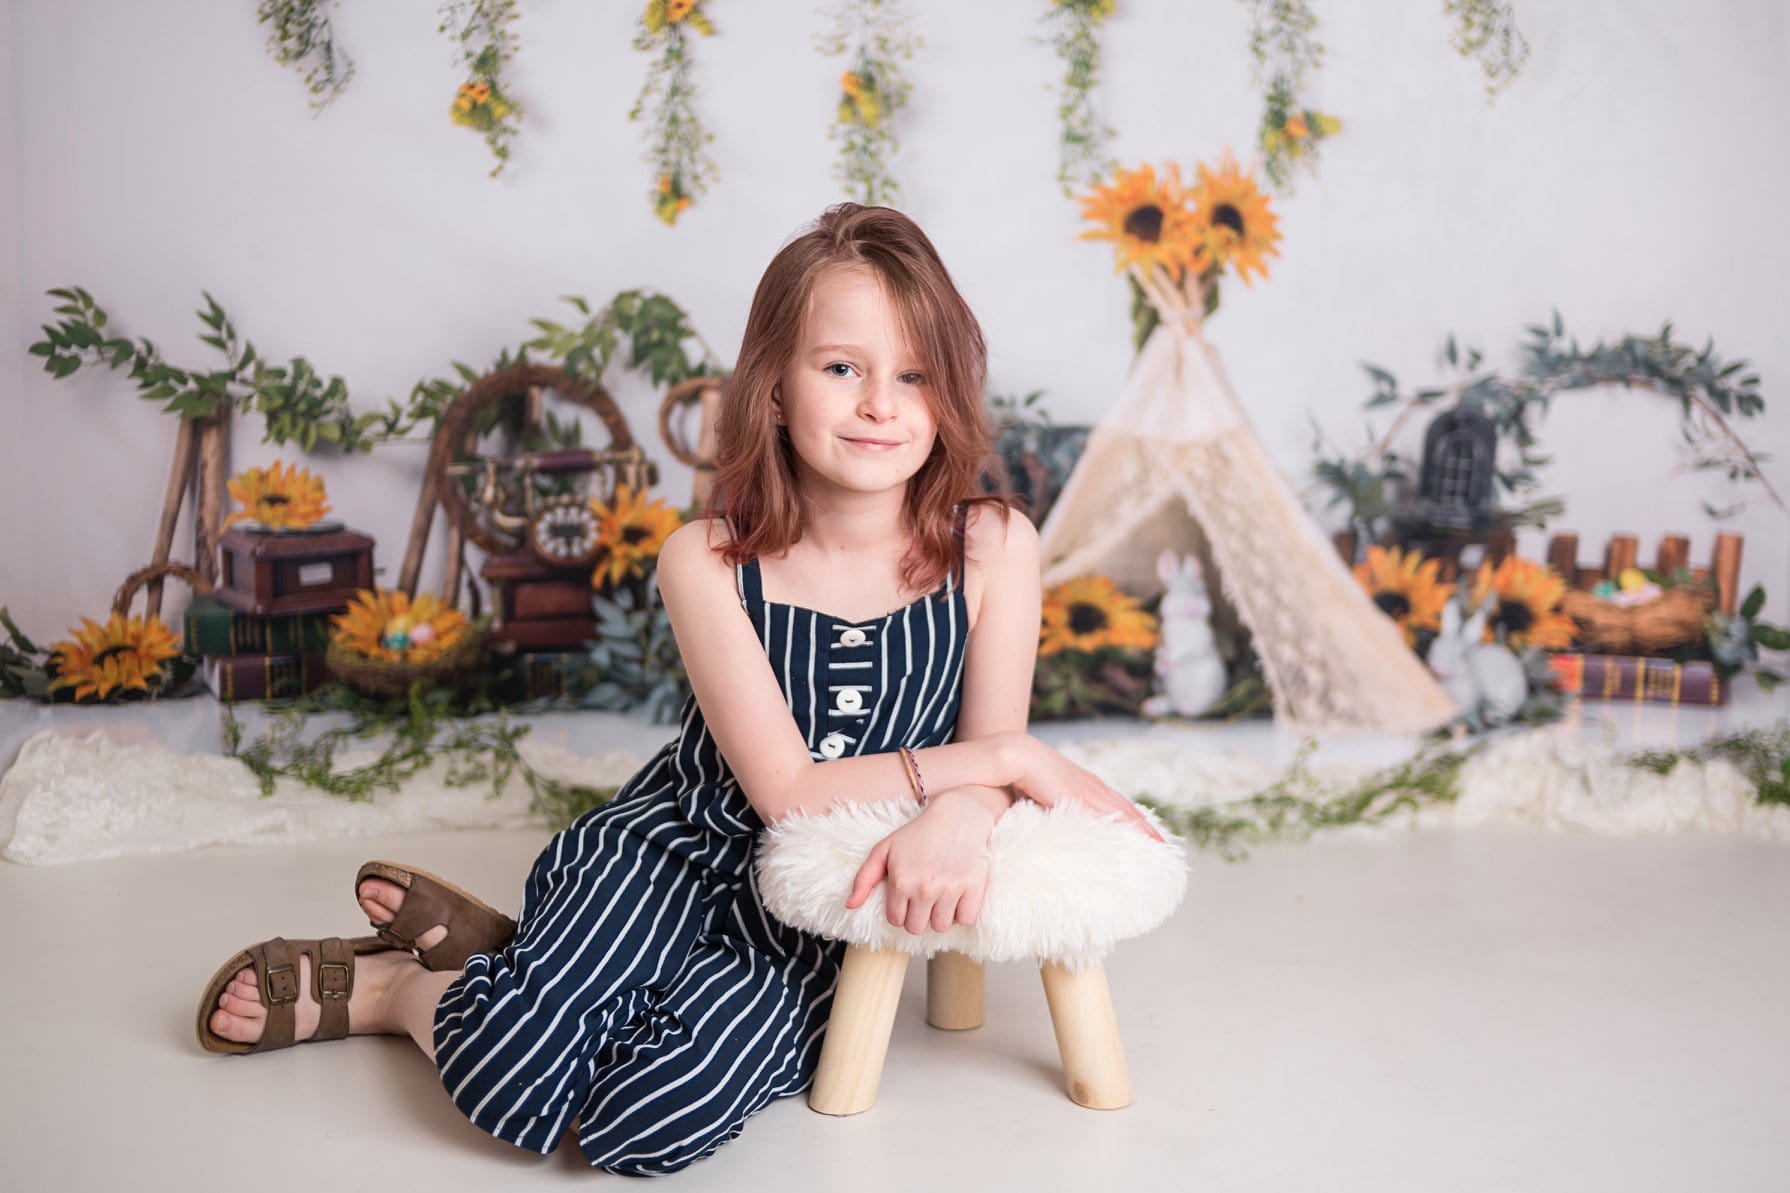 Kate Summer Sunflowers with Tent Backdrop Designed by Jia Chan Photography